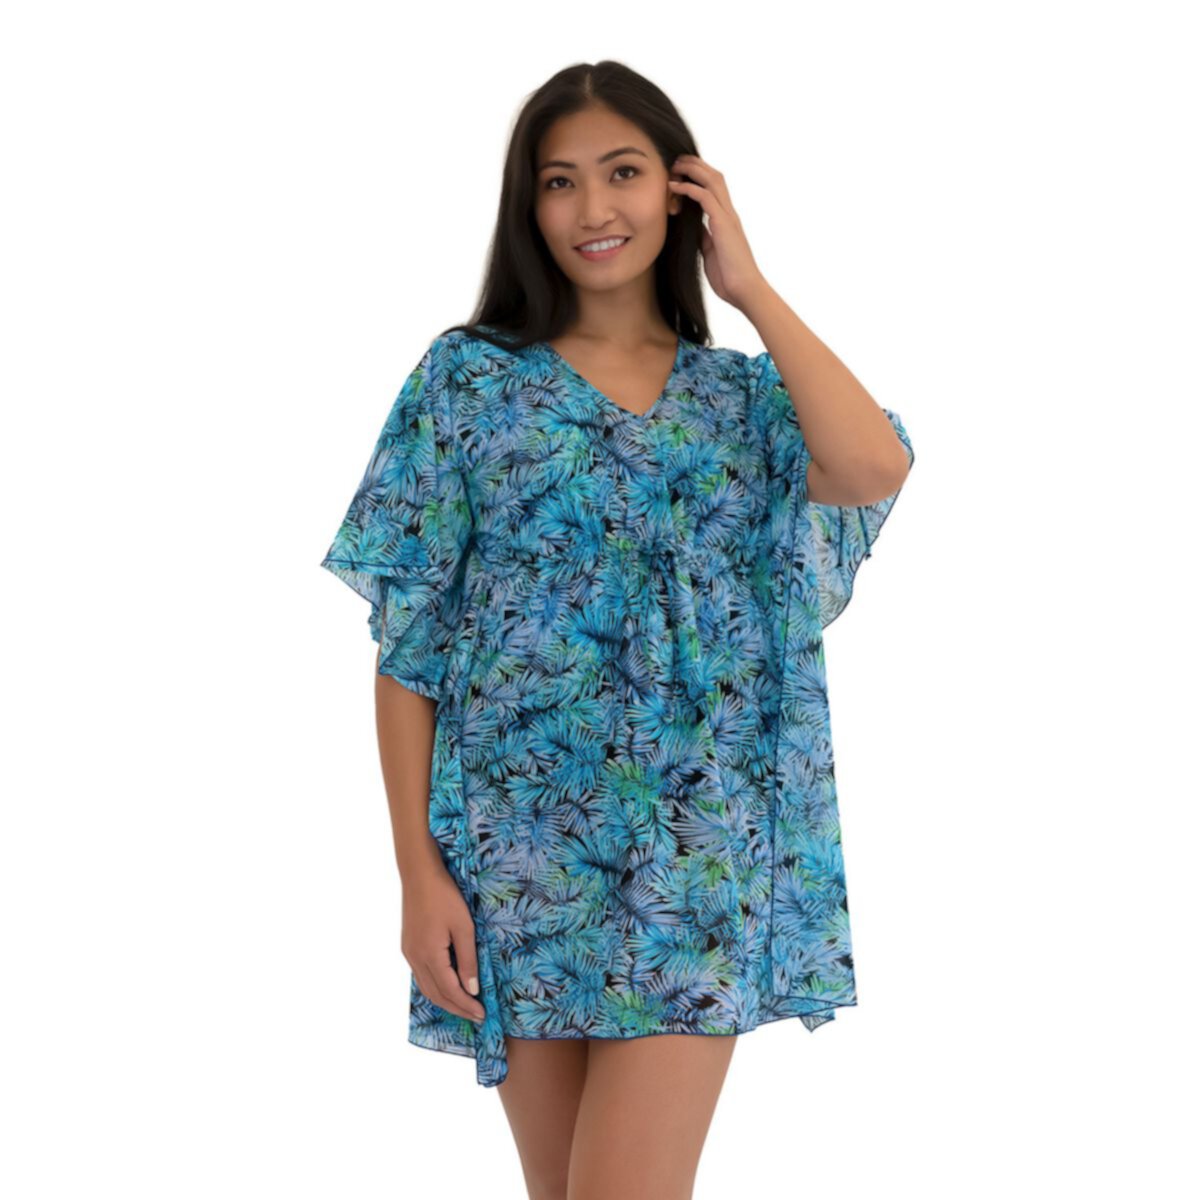 Women's A Shore Fit Beyond Eden Mesh Fit 4 All Solutions V Neck Drawstring Swim Cover Up A Shore Fit